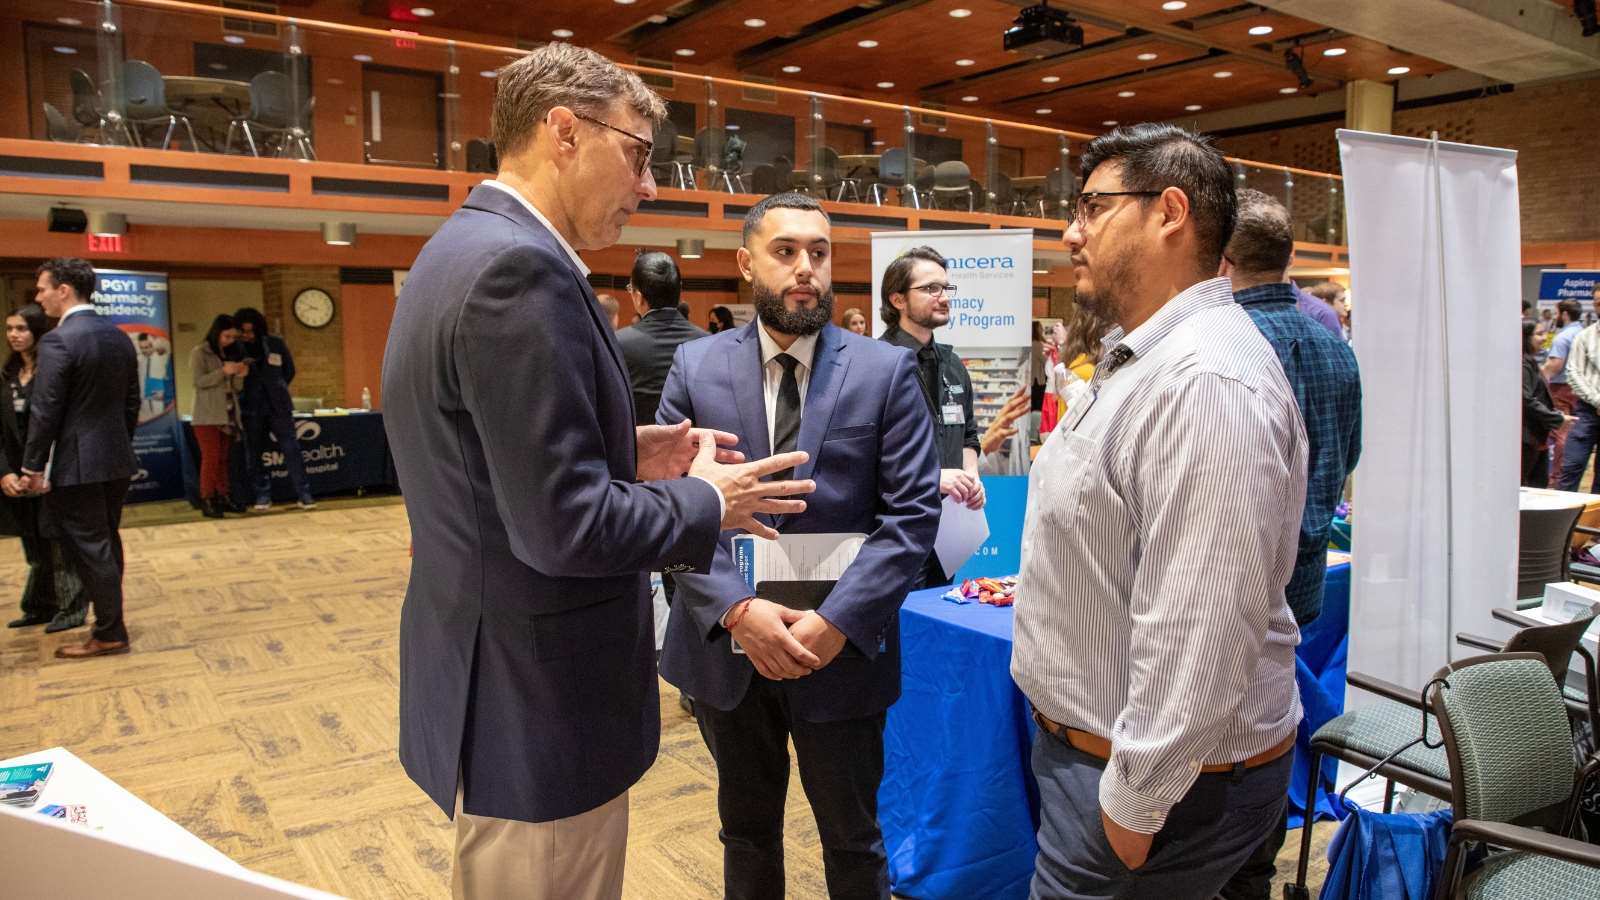 A pharmacy student and pharmacy resident speak with a pharmacist at an event.